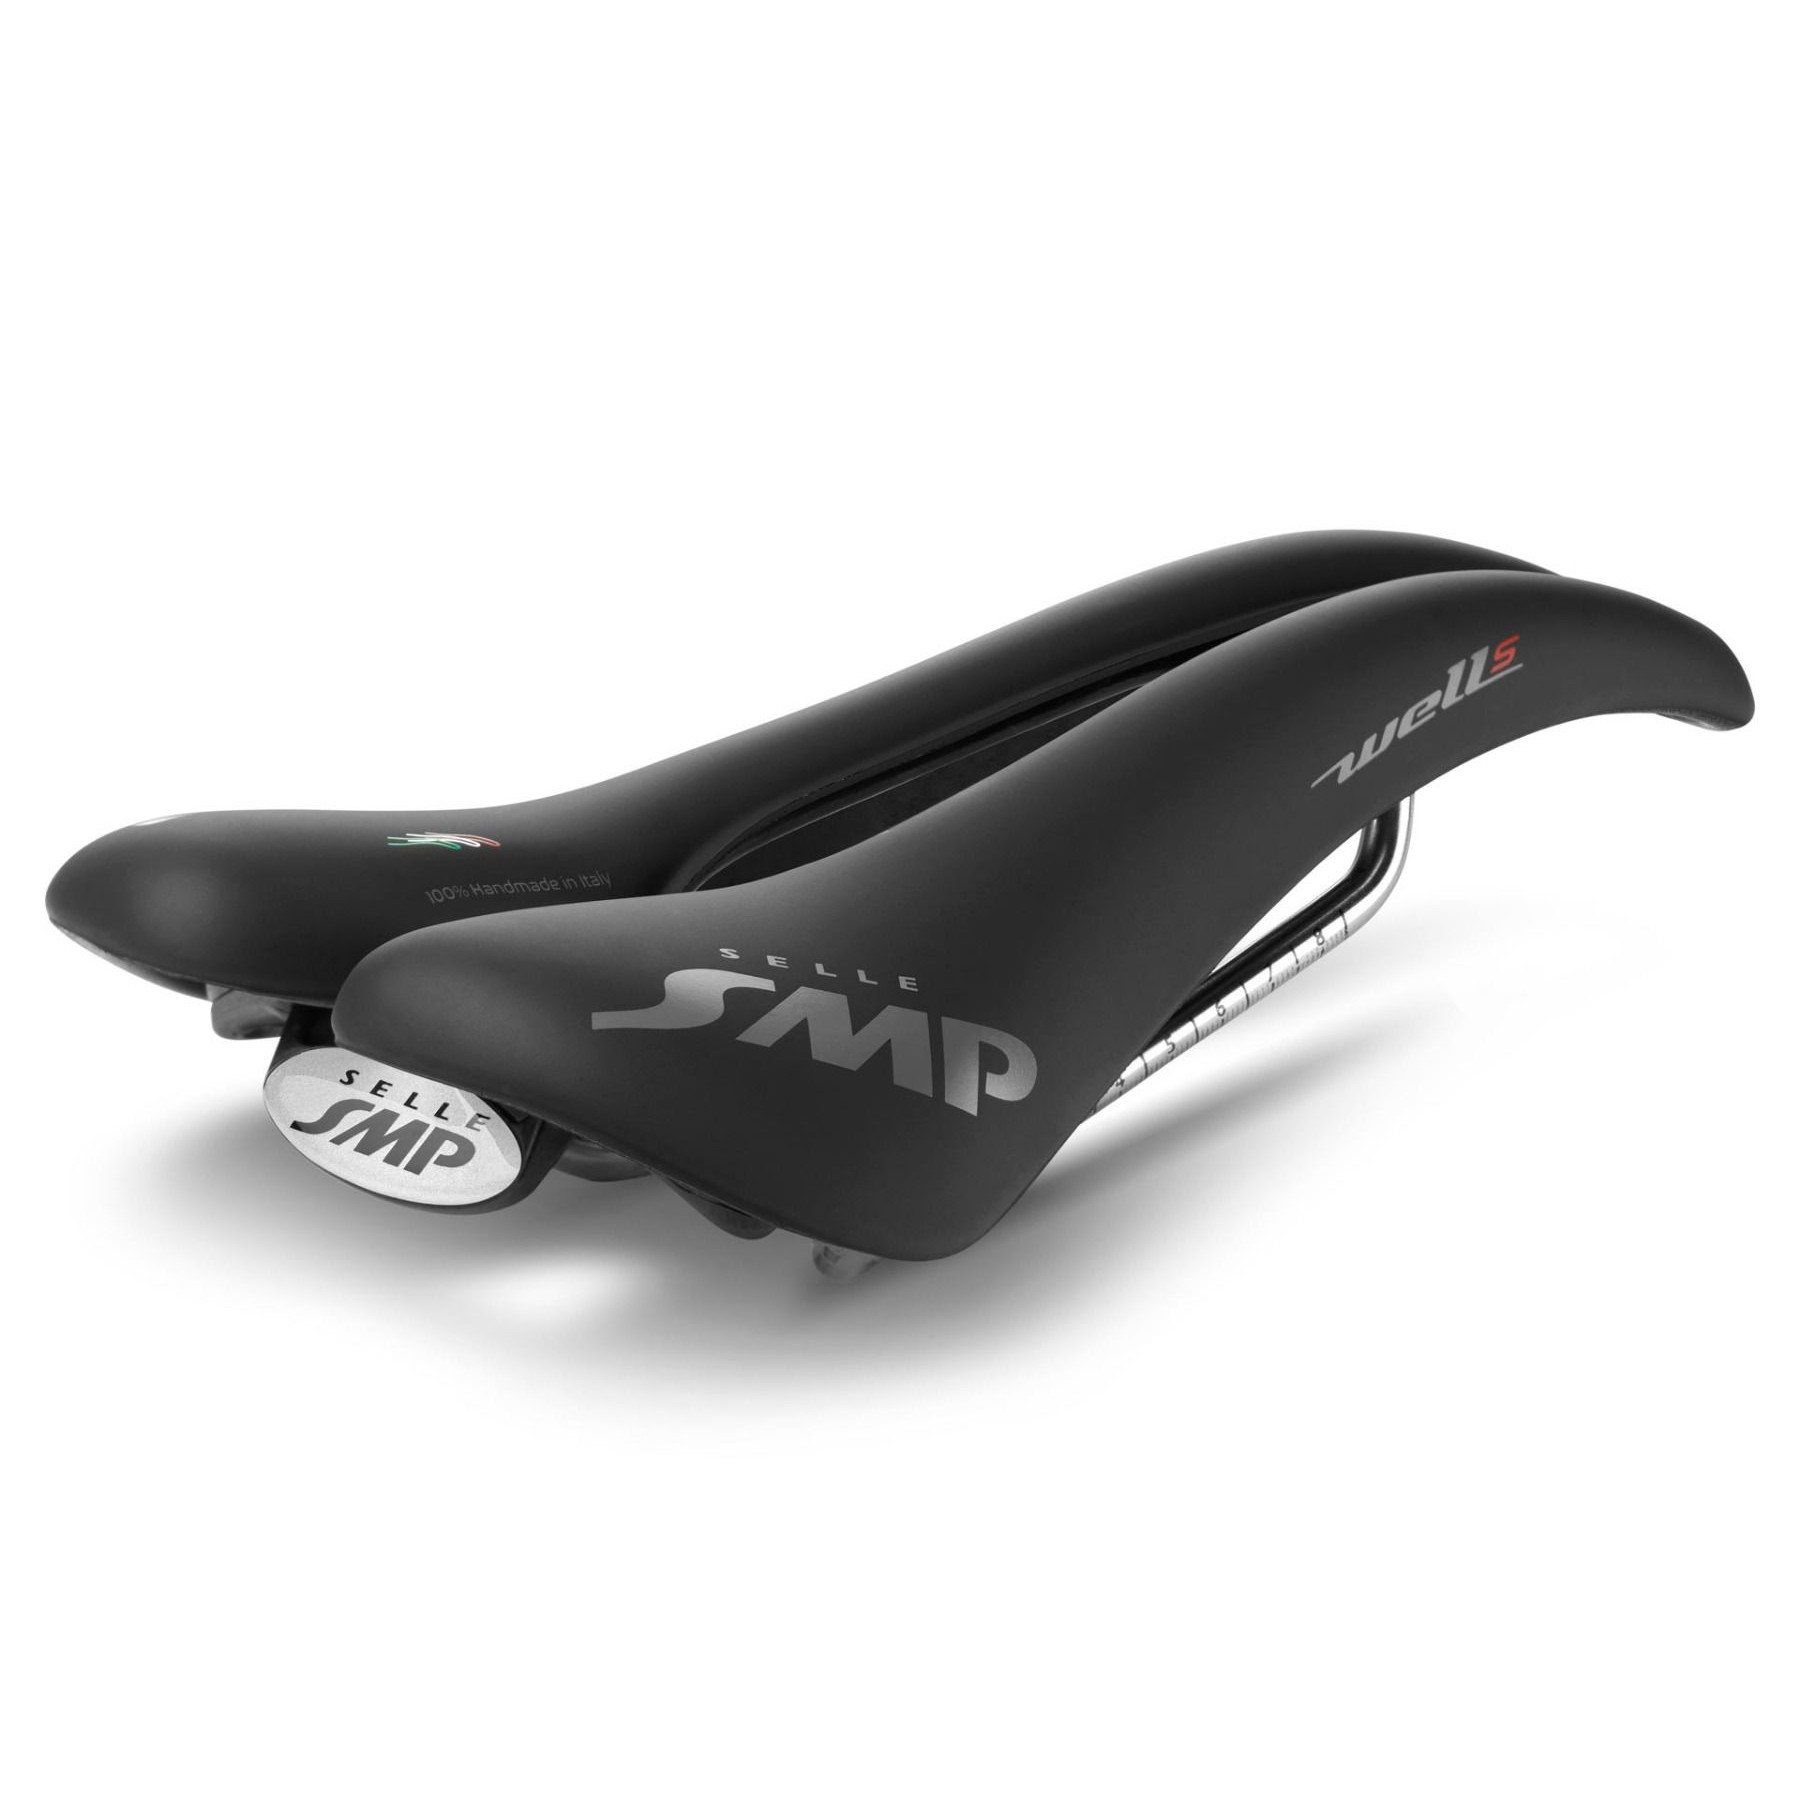 Productfoto van Selle SMP Well S Saddle - black